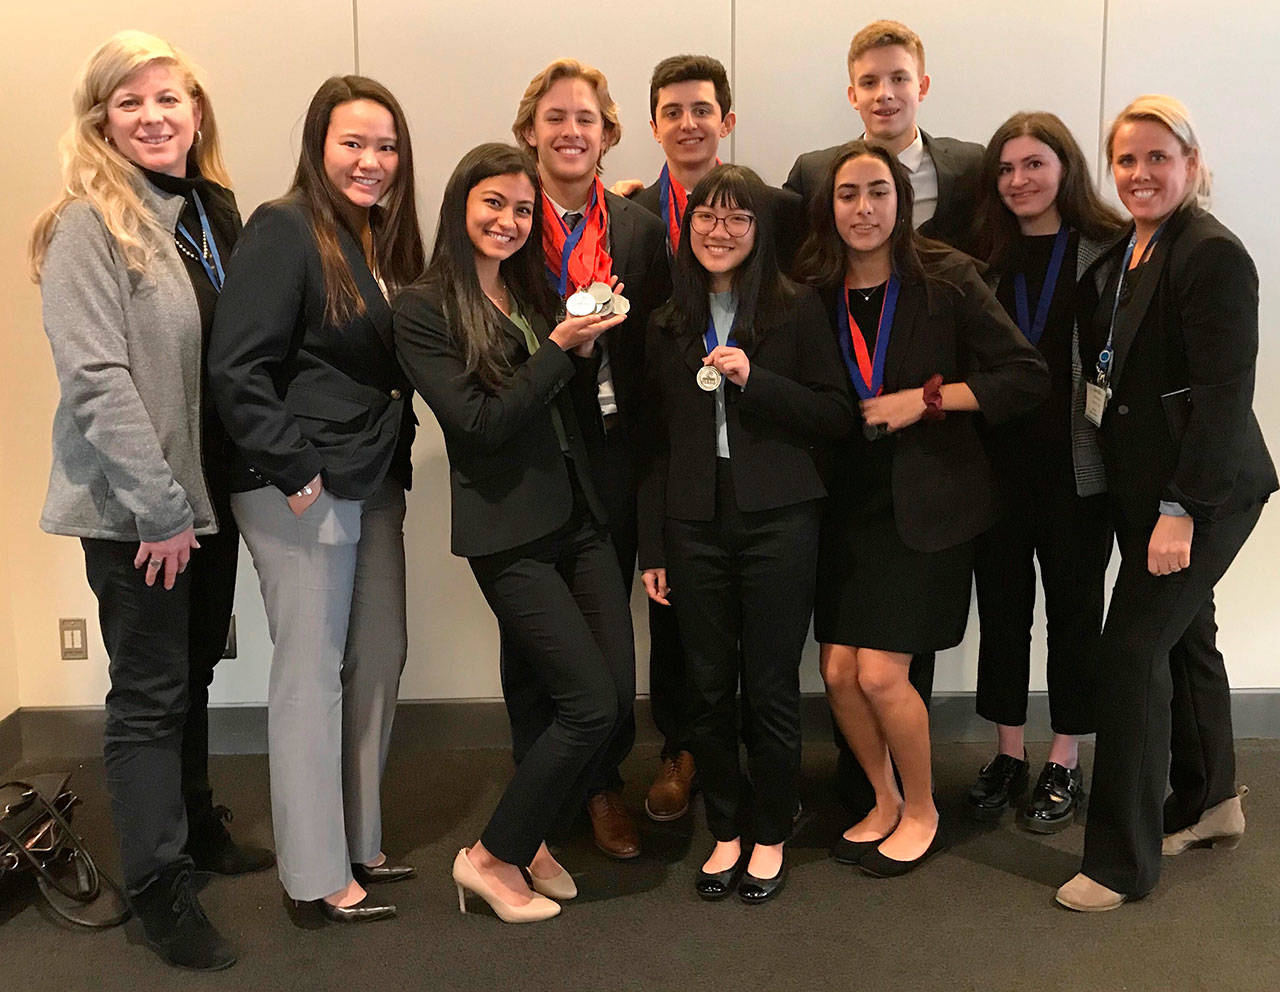 Mercer Island High School DECA students have earned a trip to the international conference in Orlando. Photo courtesy of Craig Degginger/Mercer Island School District